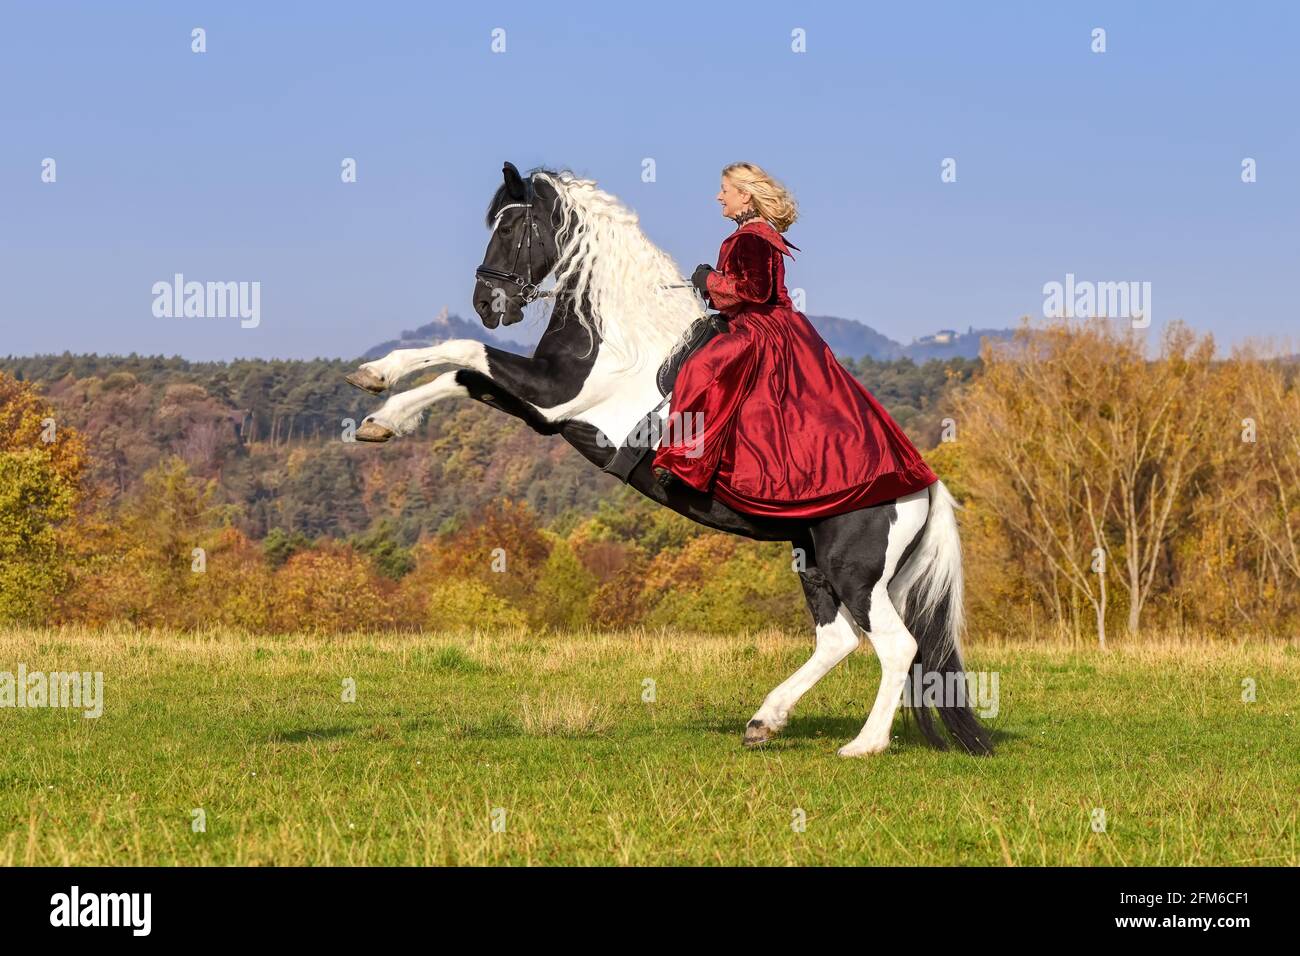 Women sitting on a rearing horse, a barock pinto black-and-white tobiano patterned, in a green grass meadow in autumn, Germany Stock Photo